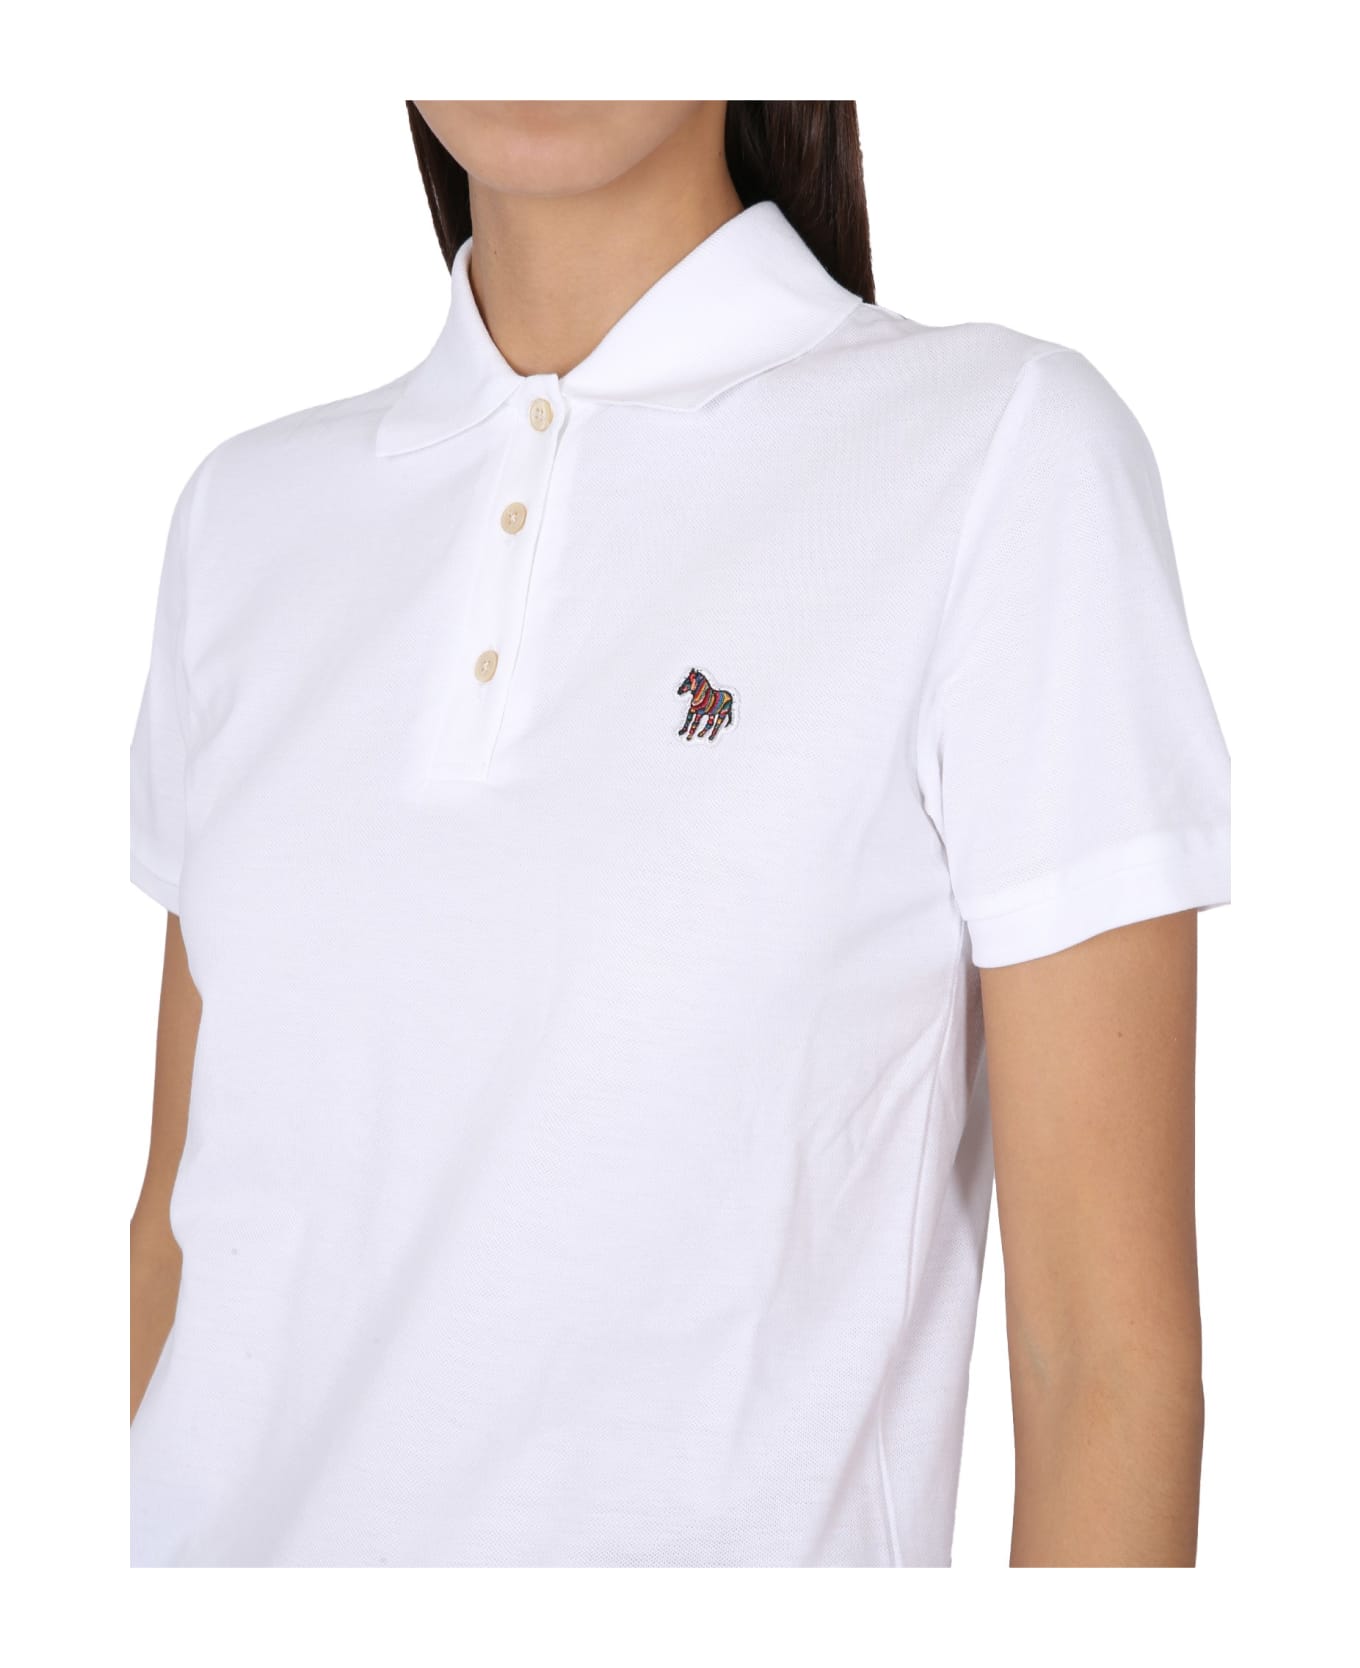 PS by Paul Smith Polo Shirt With Zebra Patch - WHITE ポロシャツ